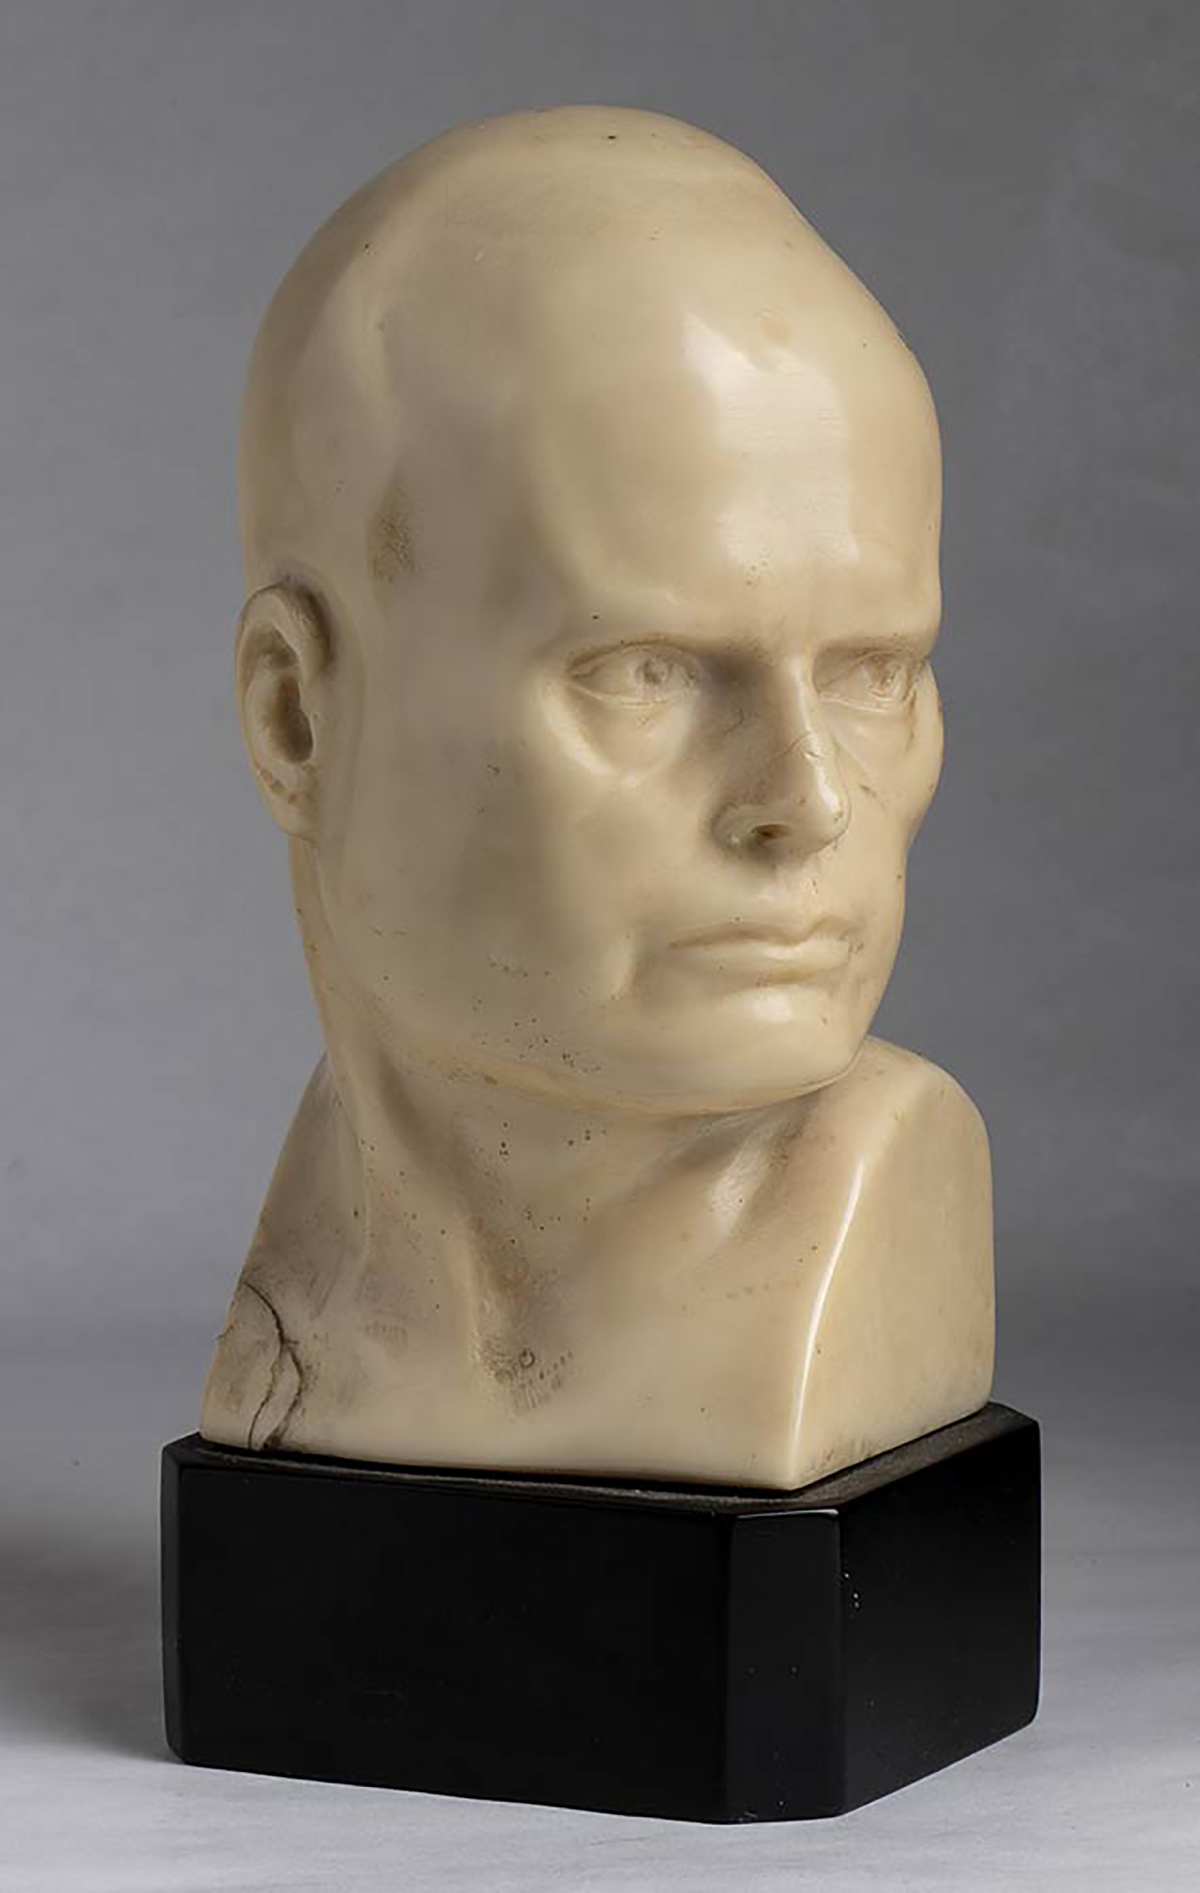 A small Benito Mussolini head, ivory paste ivory paste A small Benito Mussolini’s head, ivory paste, - Image 3 of 4